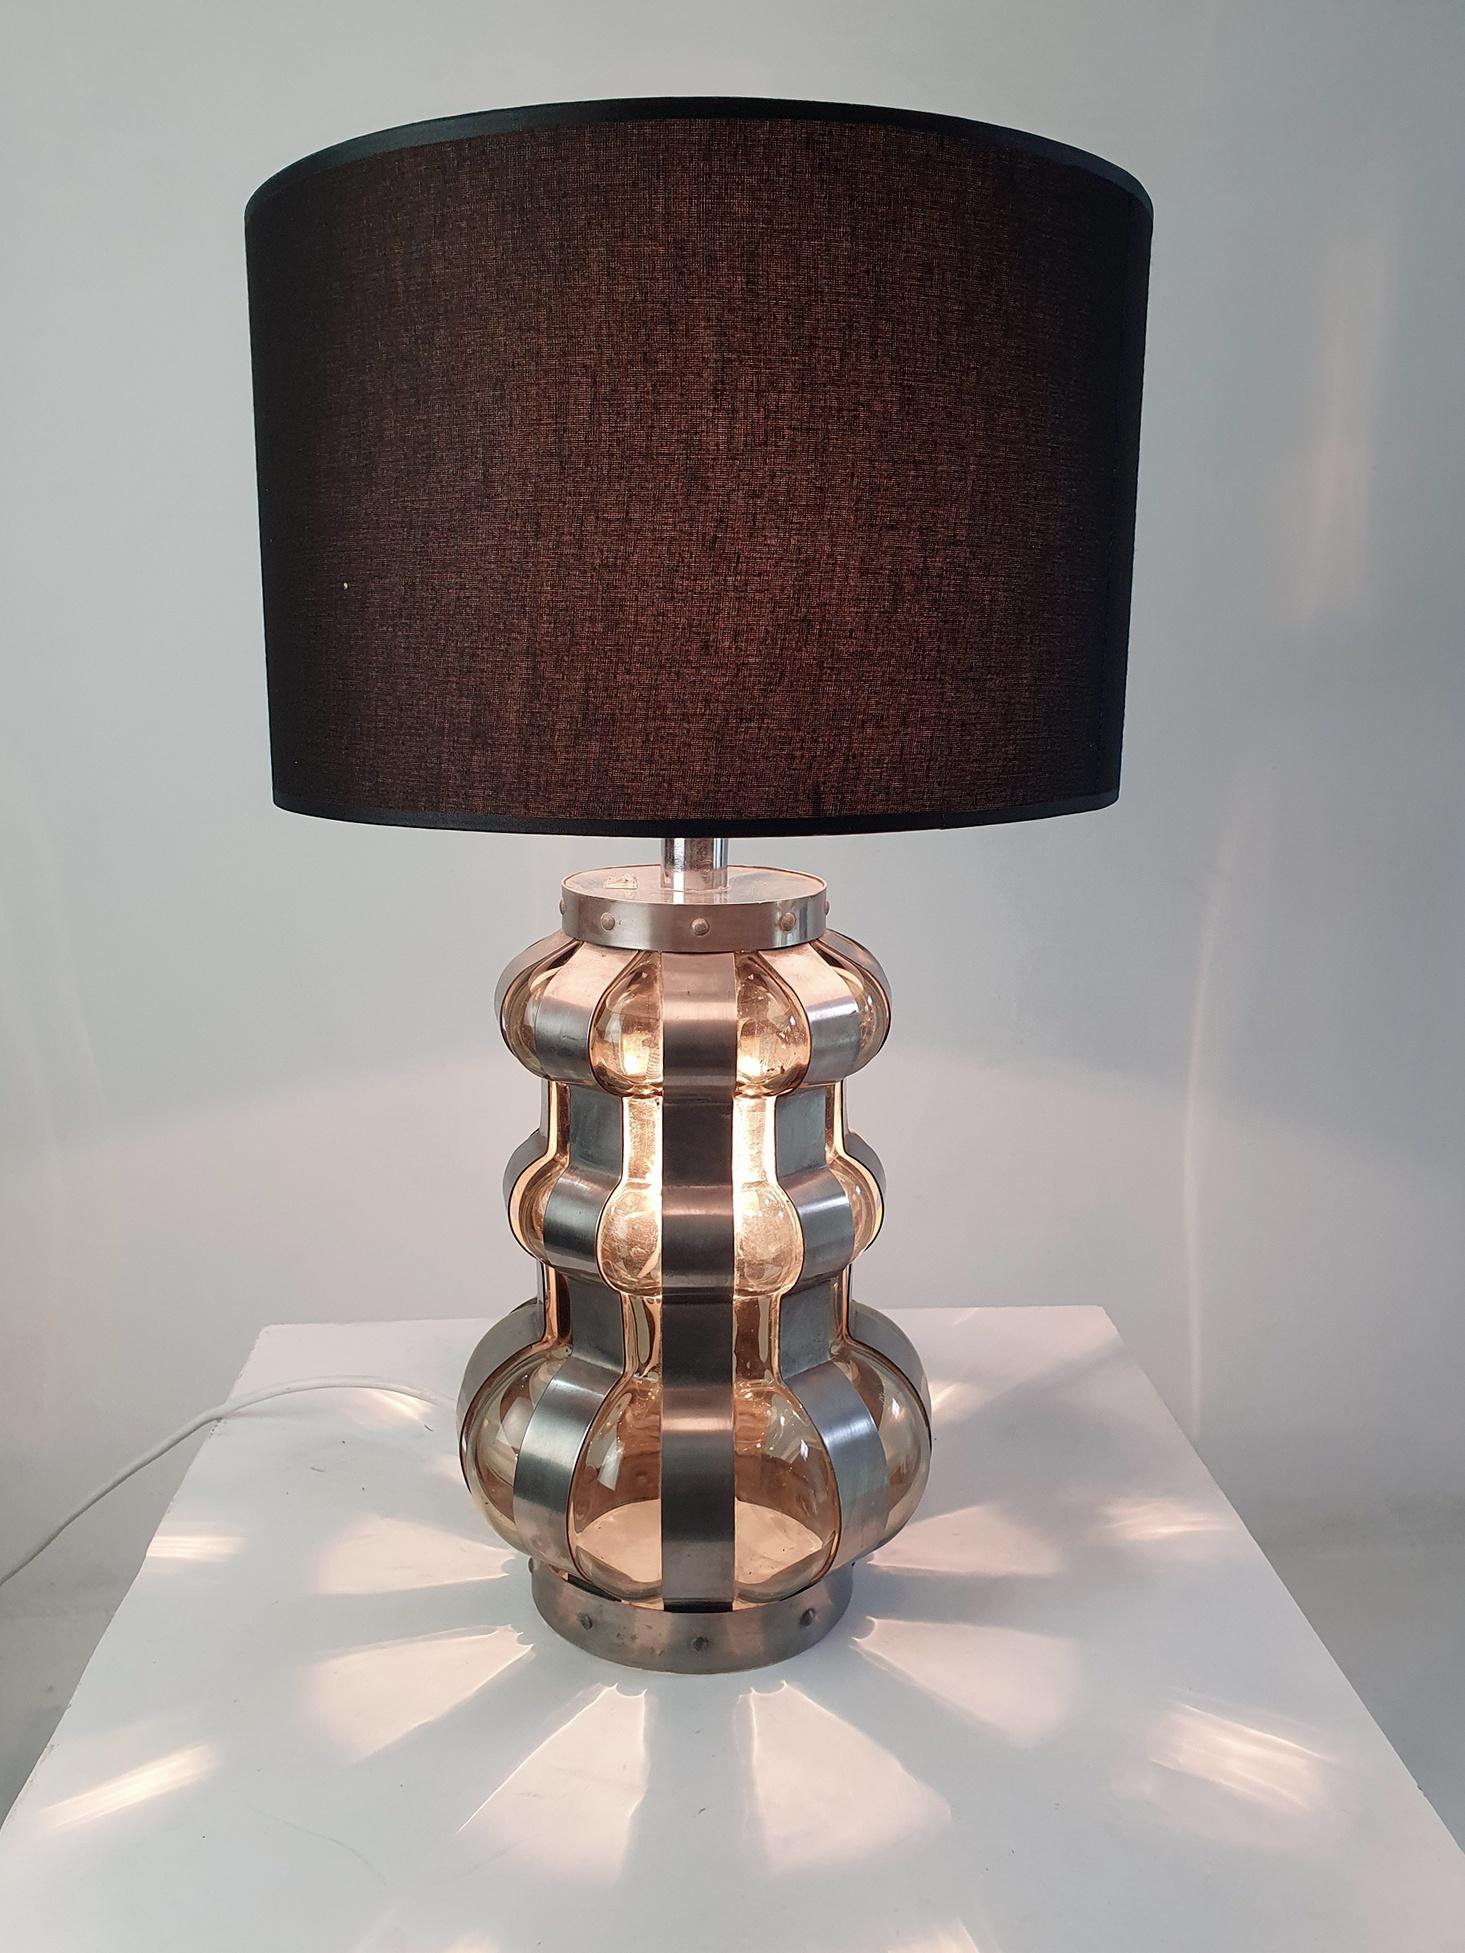 A large table lamp from the 1960s with a base in smoke colored glass which is lit from the inside and caged in by a metal chrome construction. The diameter of the base of the lamp is 22 cm and the lampshade is 35 cm in diameter. Total height with